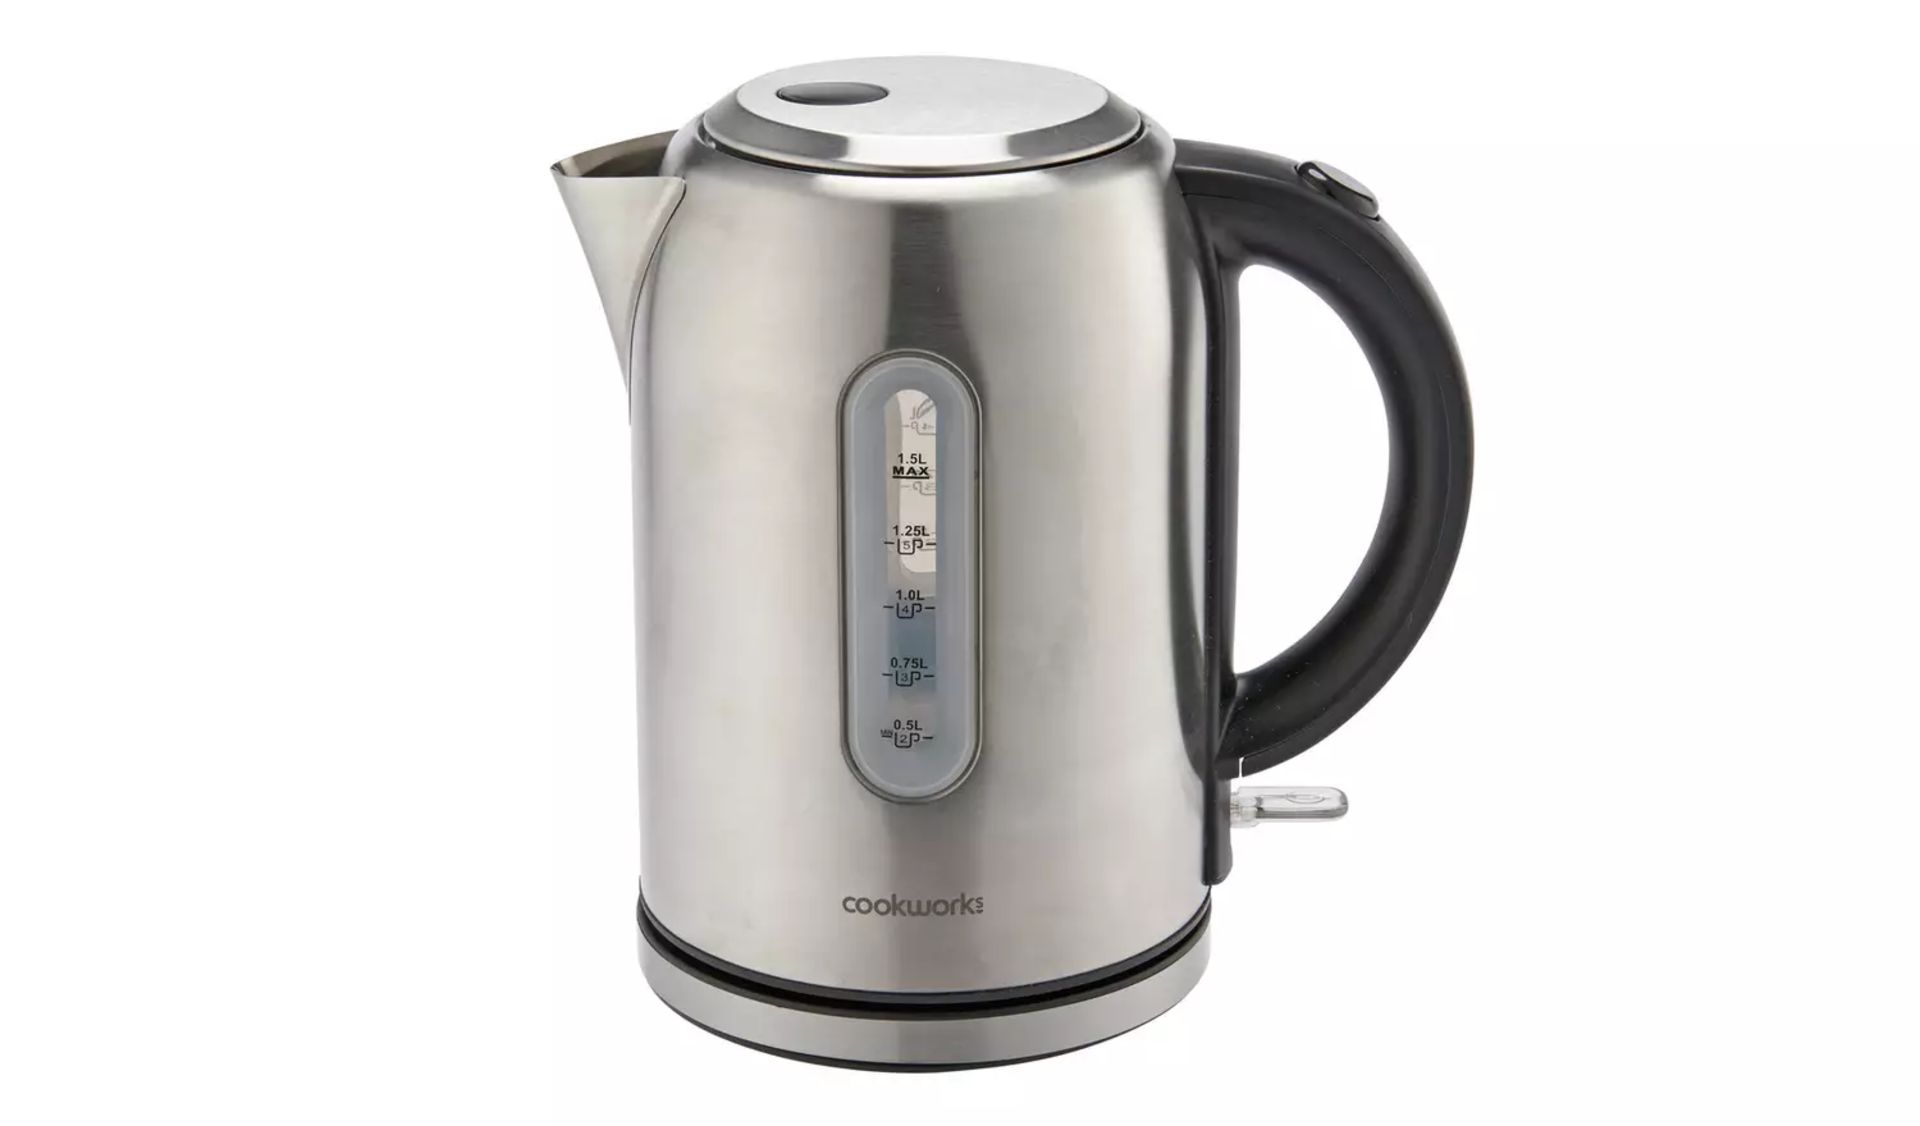 2X Cookworks Illuminated Kettle - Brushed Stainless Steel